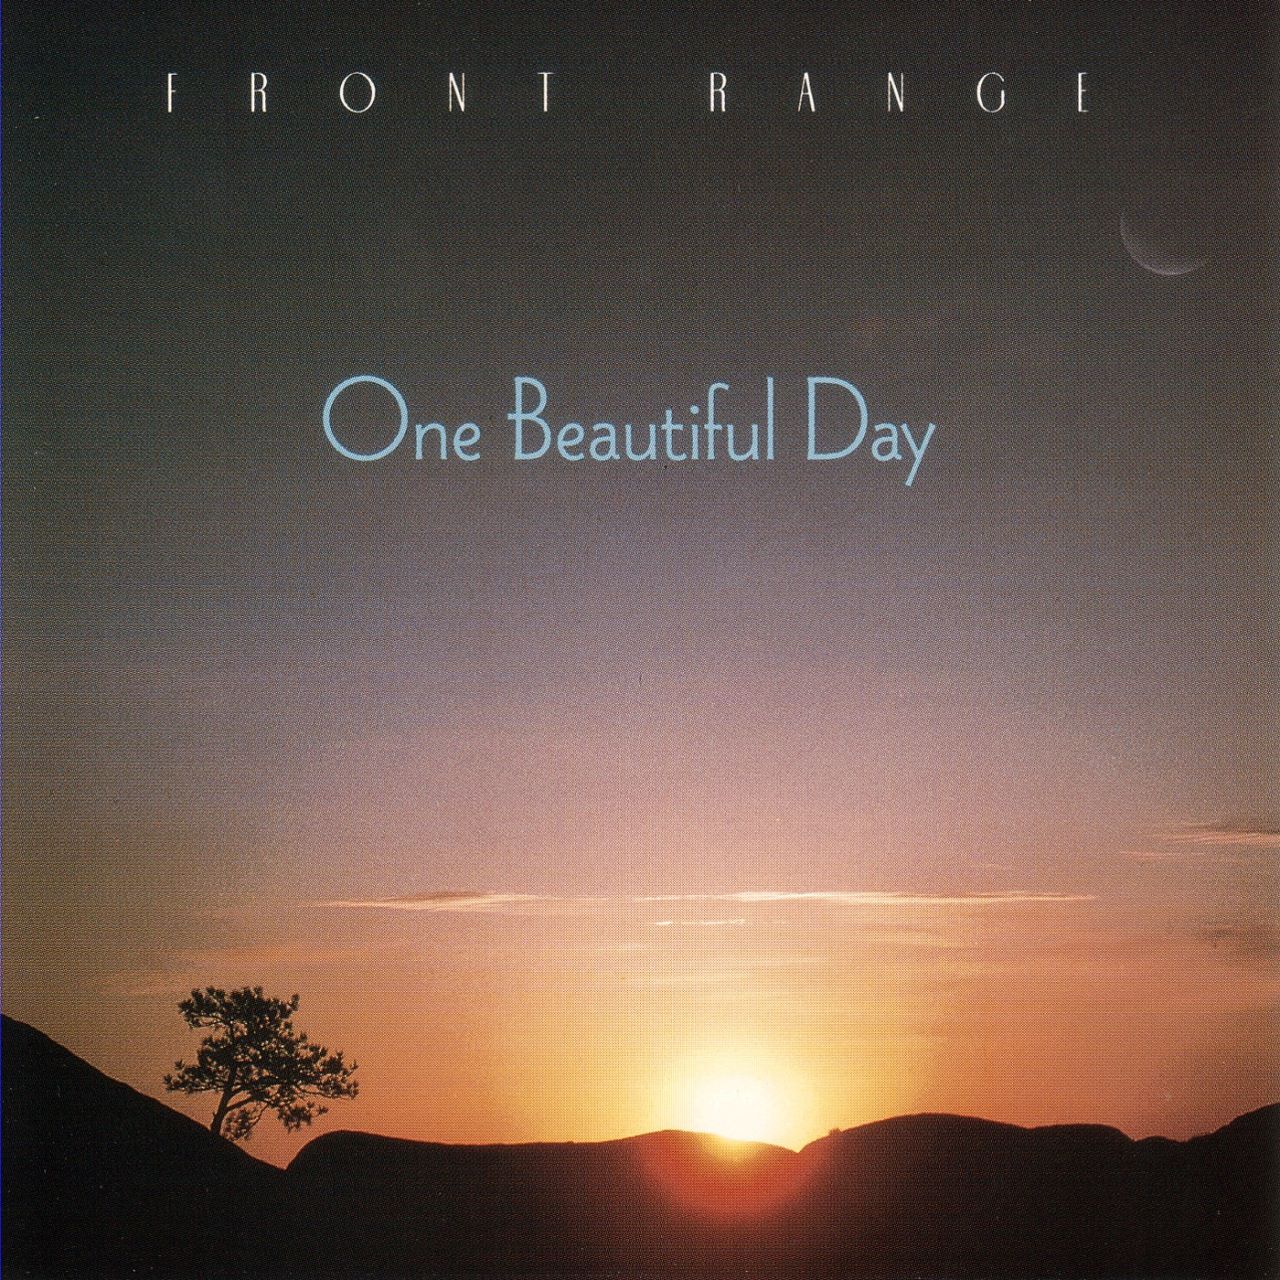 Front Range - One Beautiful Day cover album